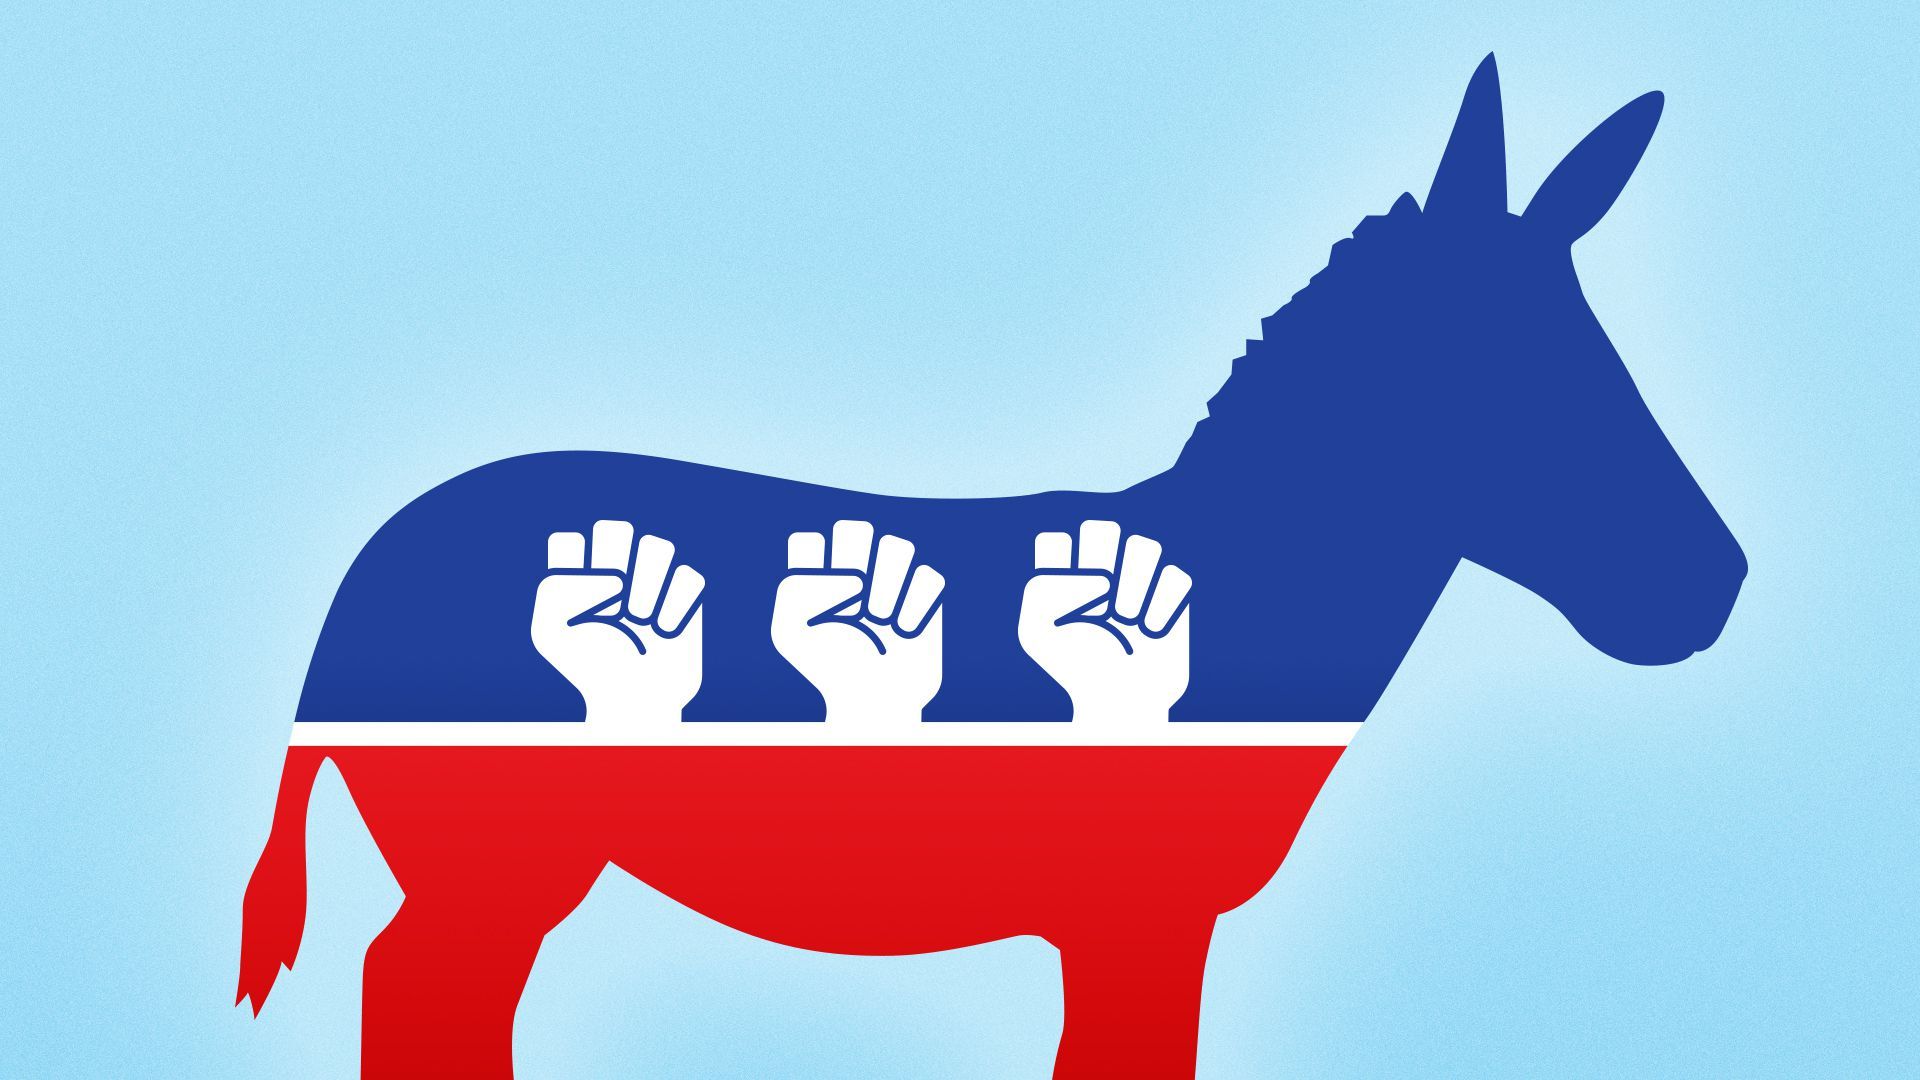 Illustration of the democratic party donkey with three fist icons in place of stars